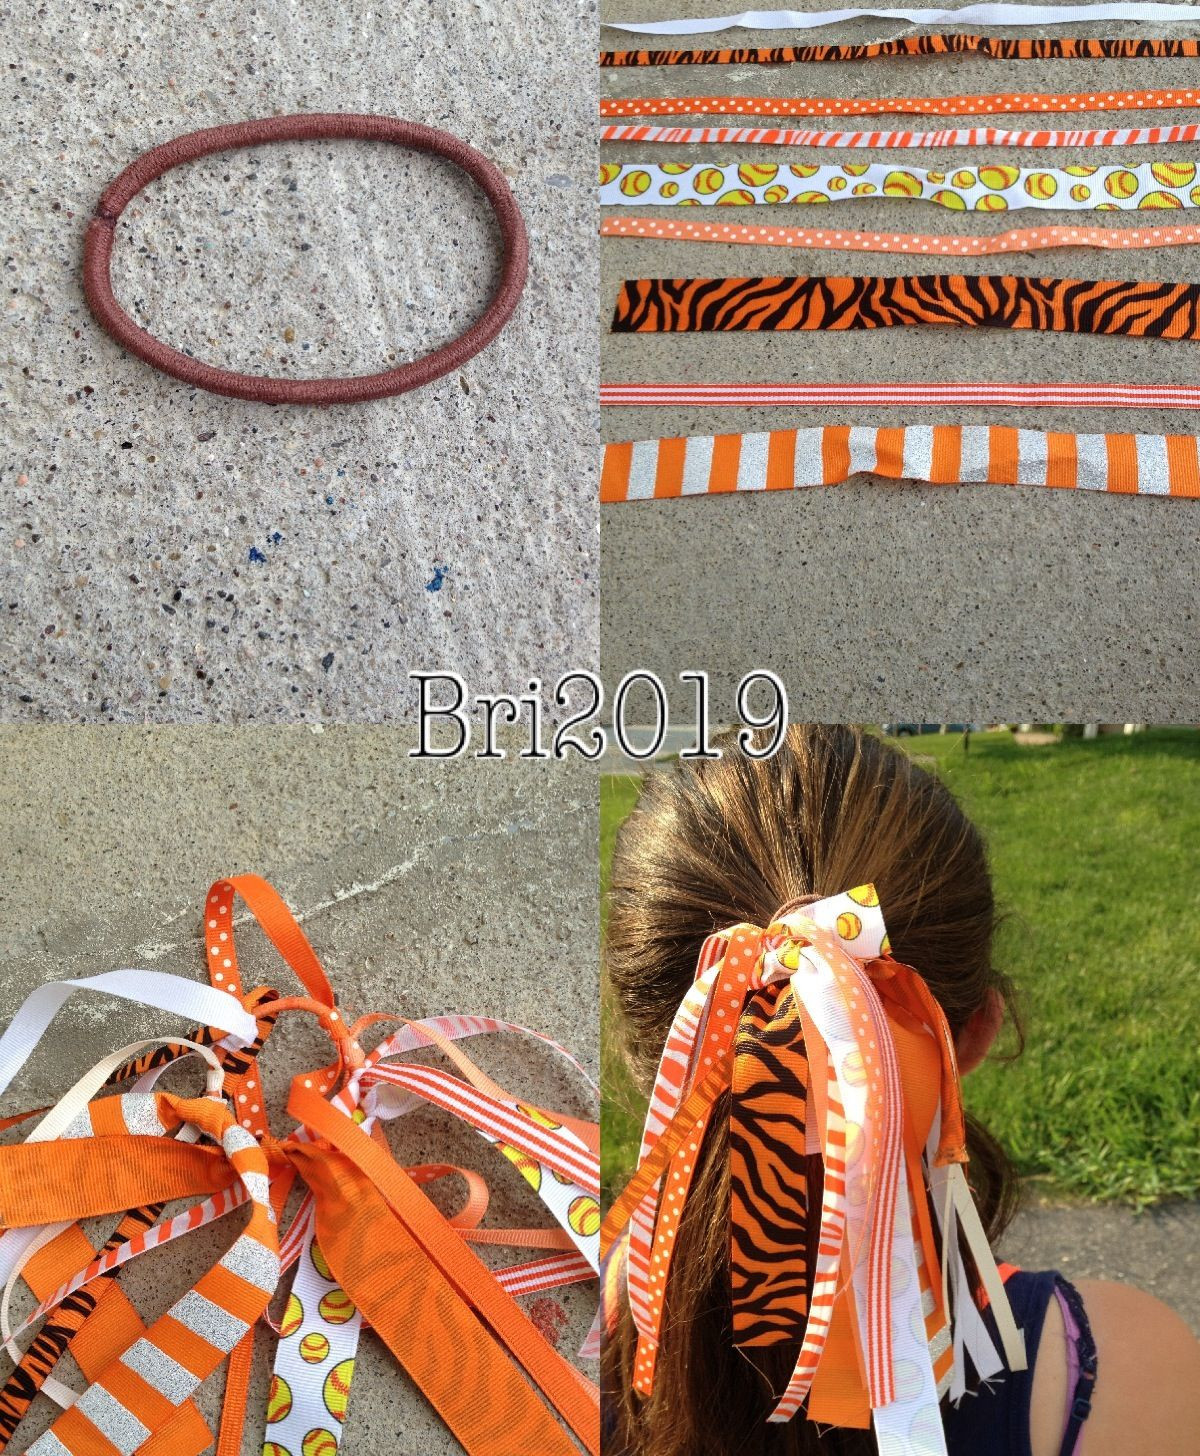 Ribbon Hair Ties DIY
 DIY for a hair tie This one is for softball But you can